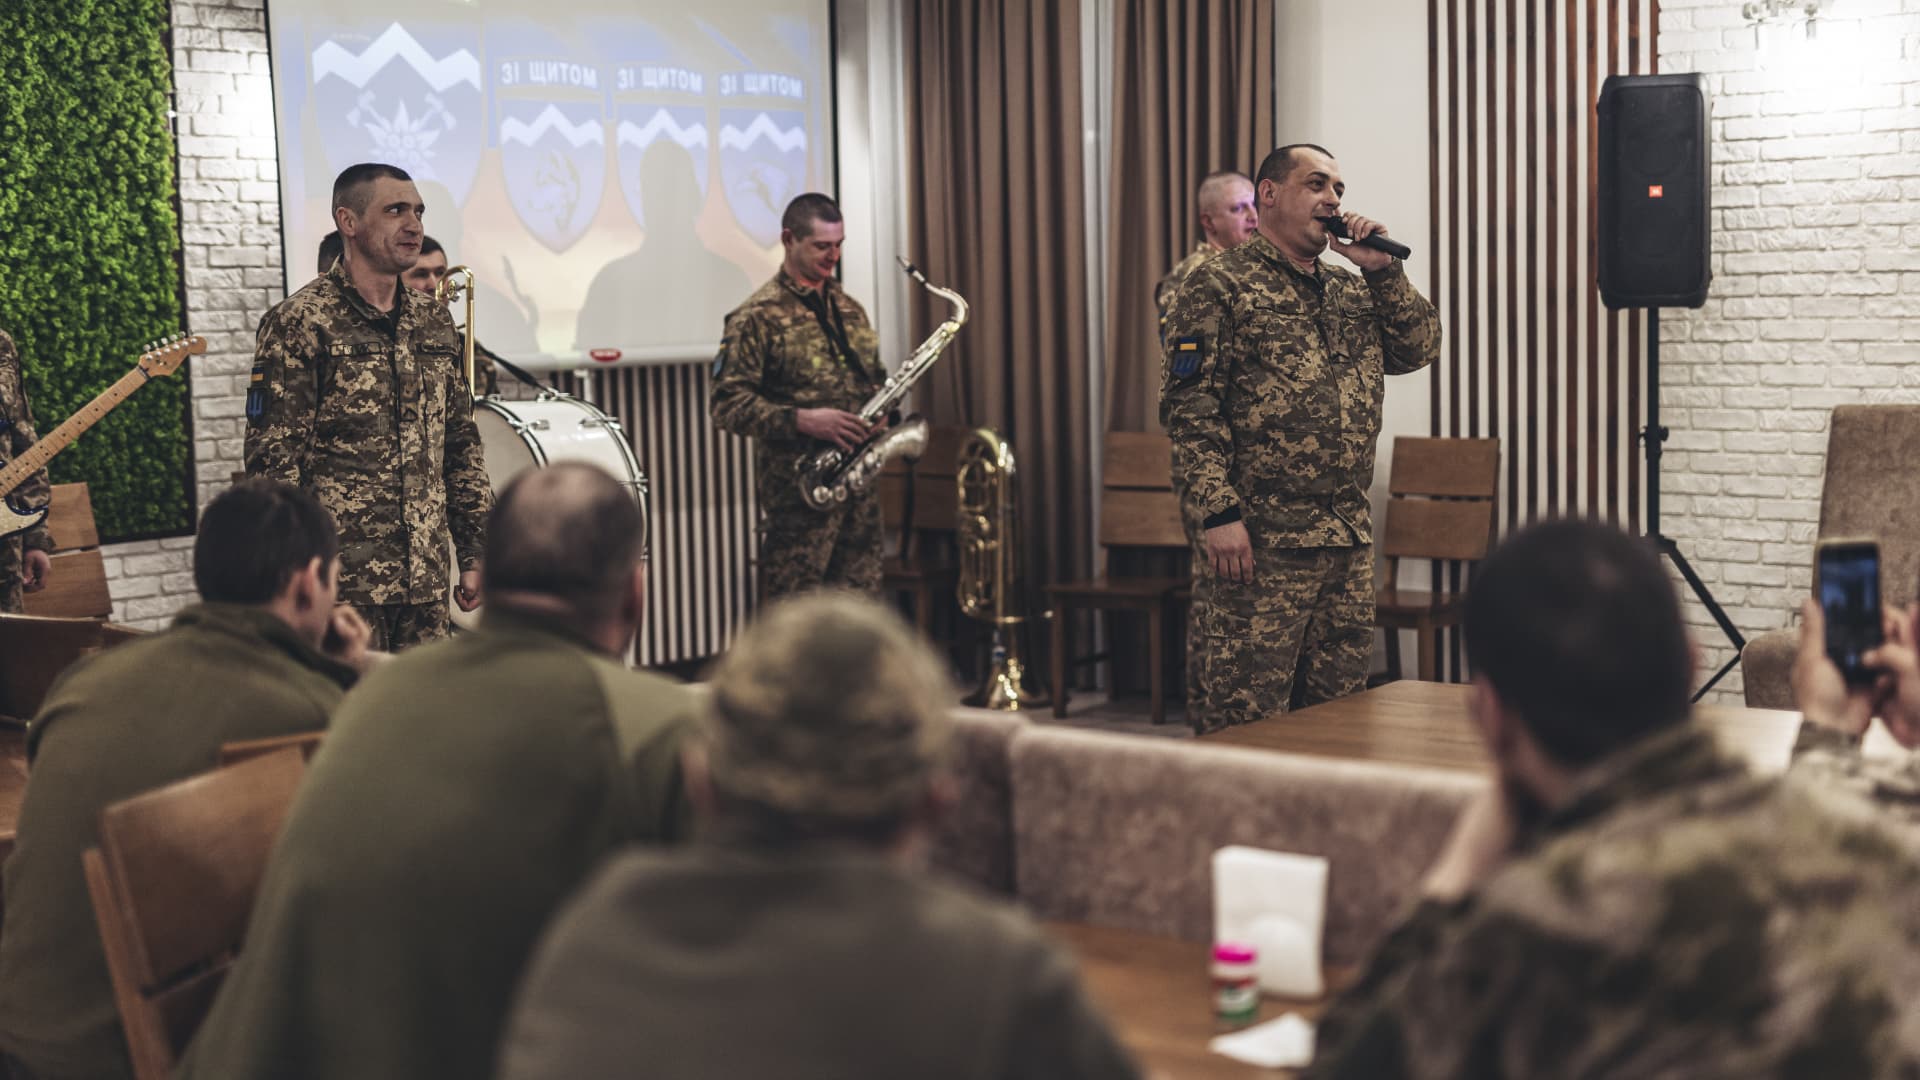 EASTERN UKRAINE, UKRAINE - MARCH 20: Ukrainian soldiers give a small concert for Ukrainian Army at a rehabilitation center in eastern Ukraine as Russia-Ukraine war continues on March 20, 2023. (Photo by Diego Herrera Carcedo/Anadolu Agency via Getty Images)